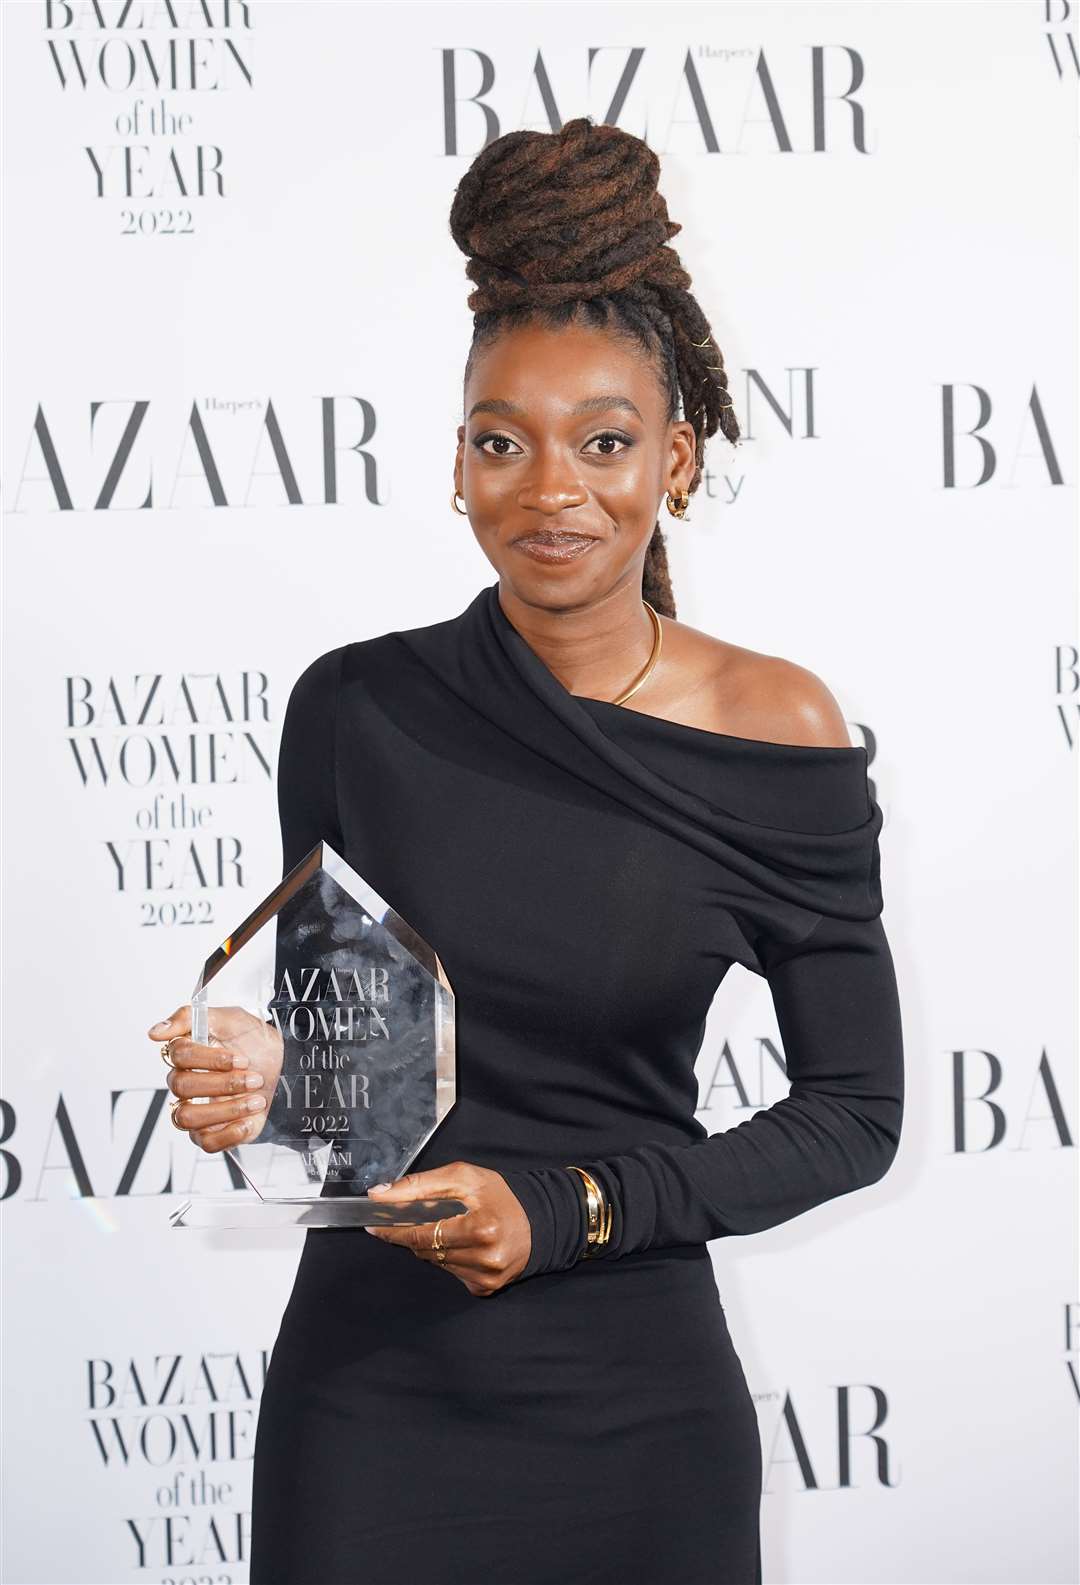 Little Simz with the Musician Award, at the Harper’s Bazaar Women of the Year 2022 (Ian West/PA)